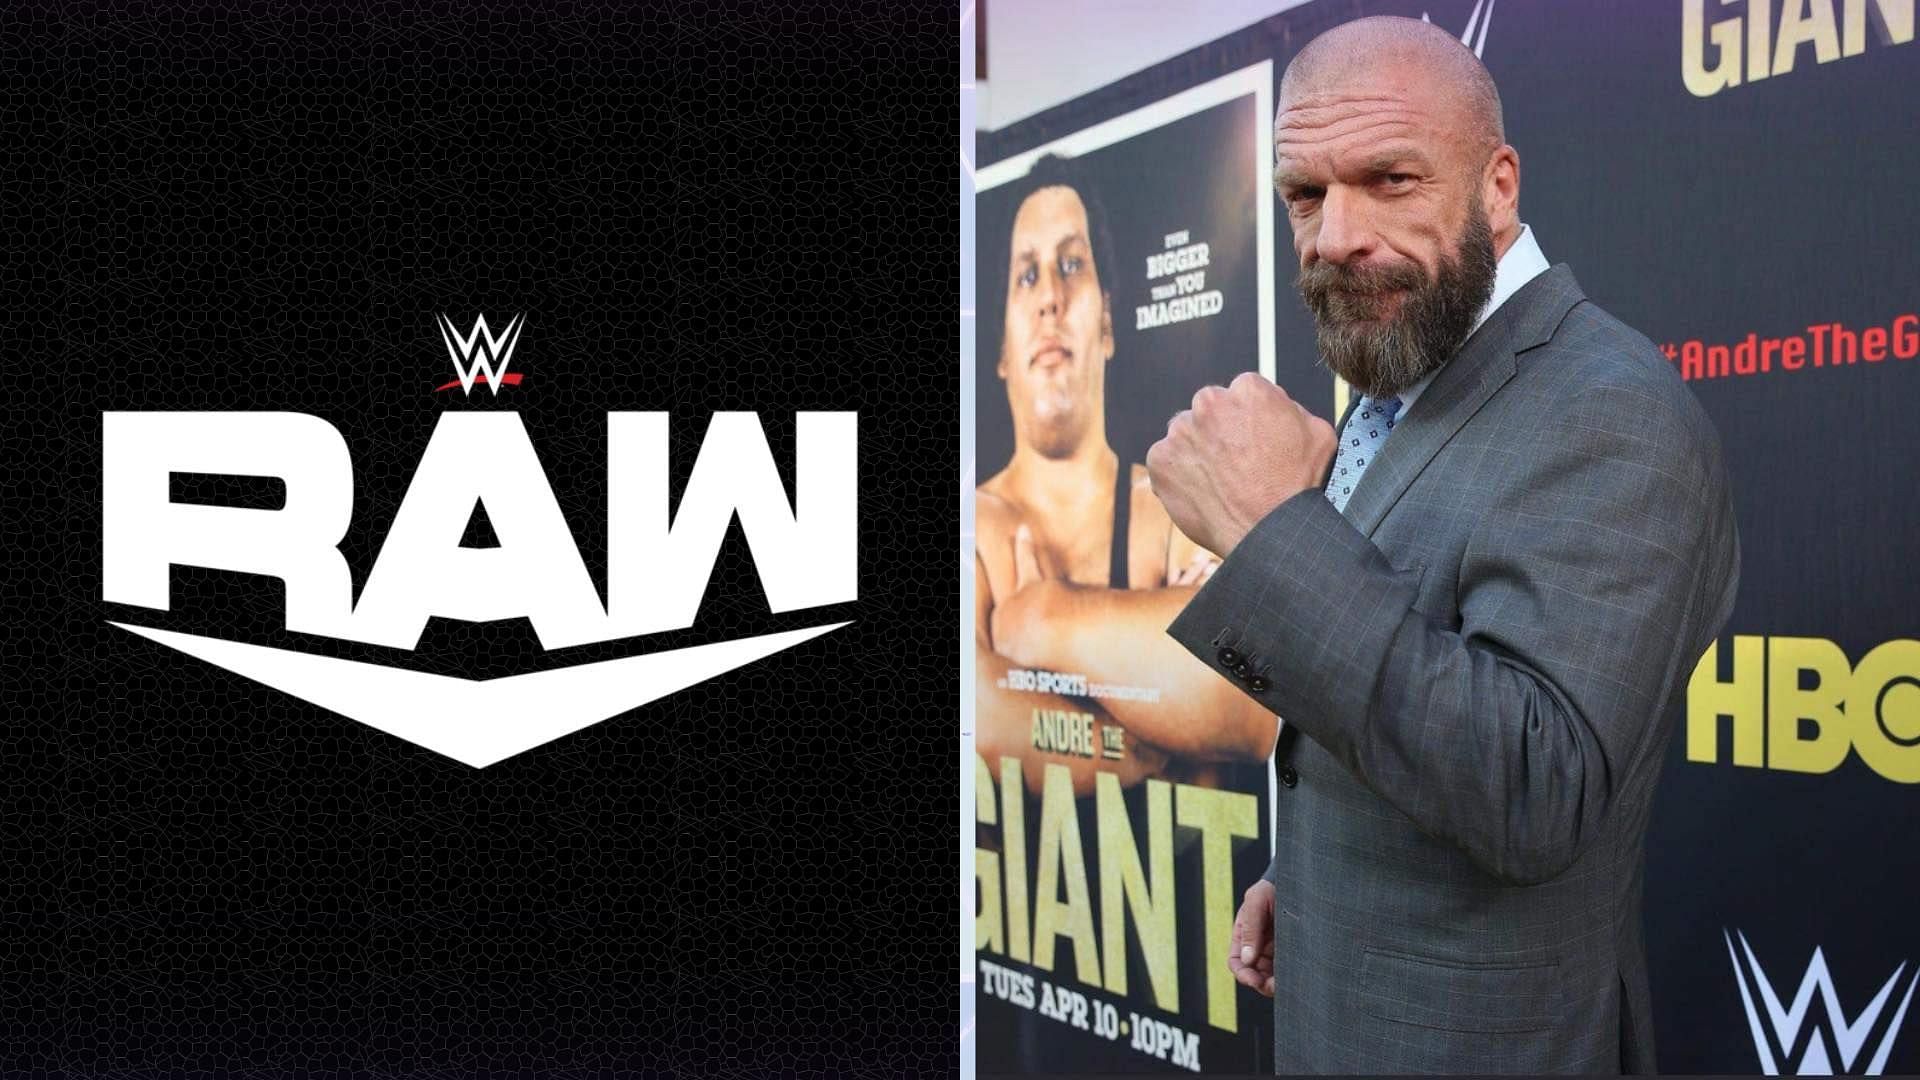 Some WWE RAW stars need more TV time in the Triple H era